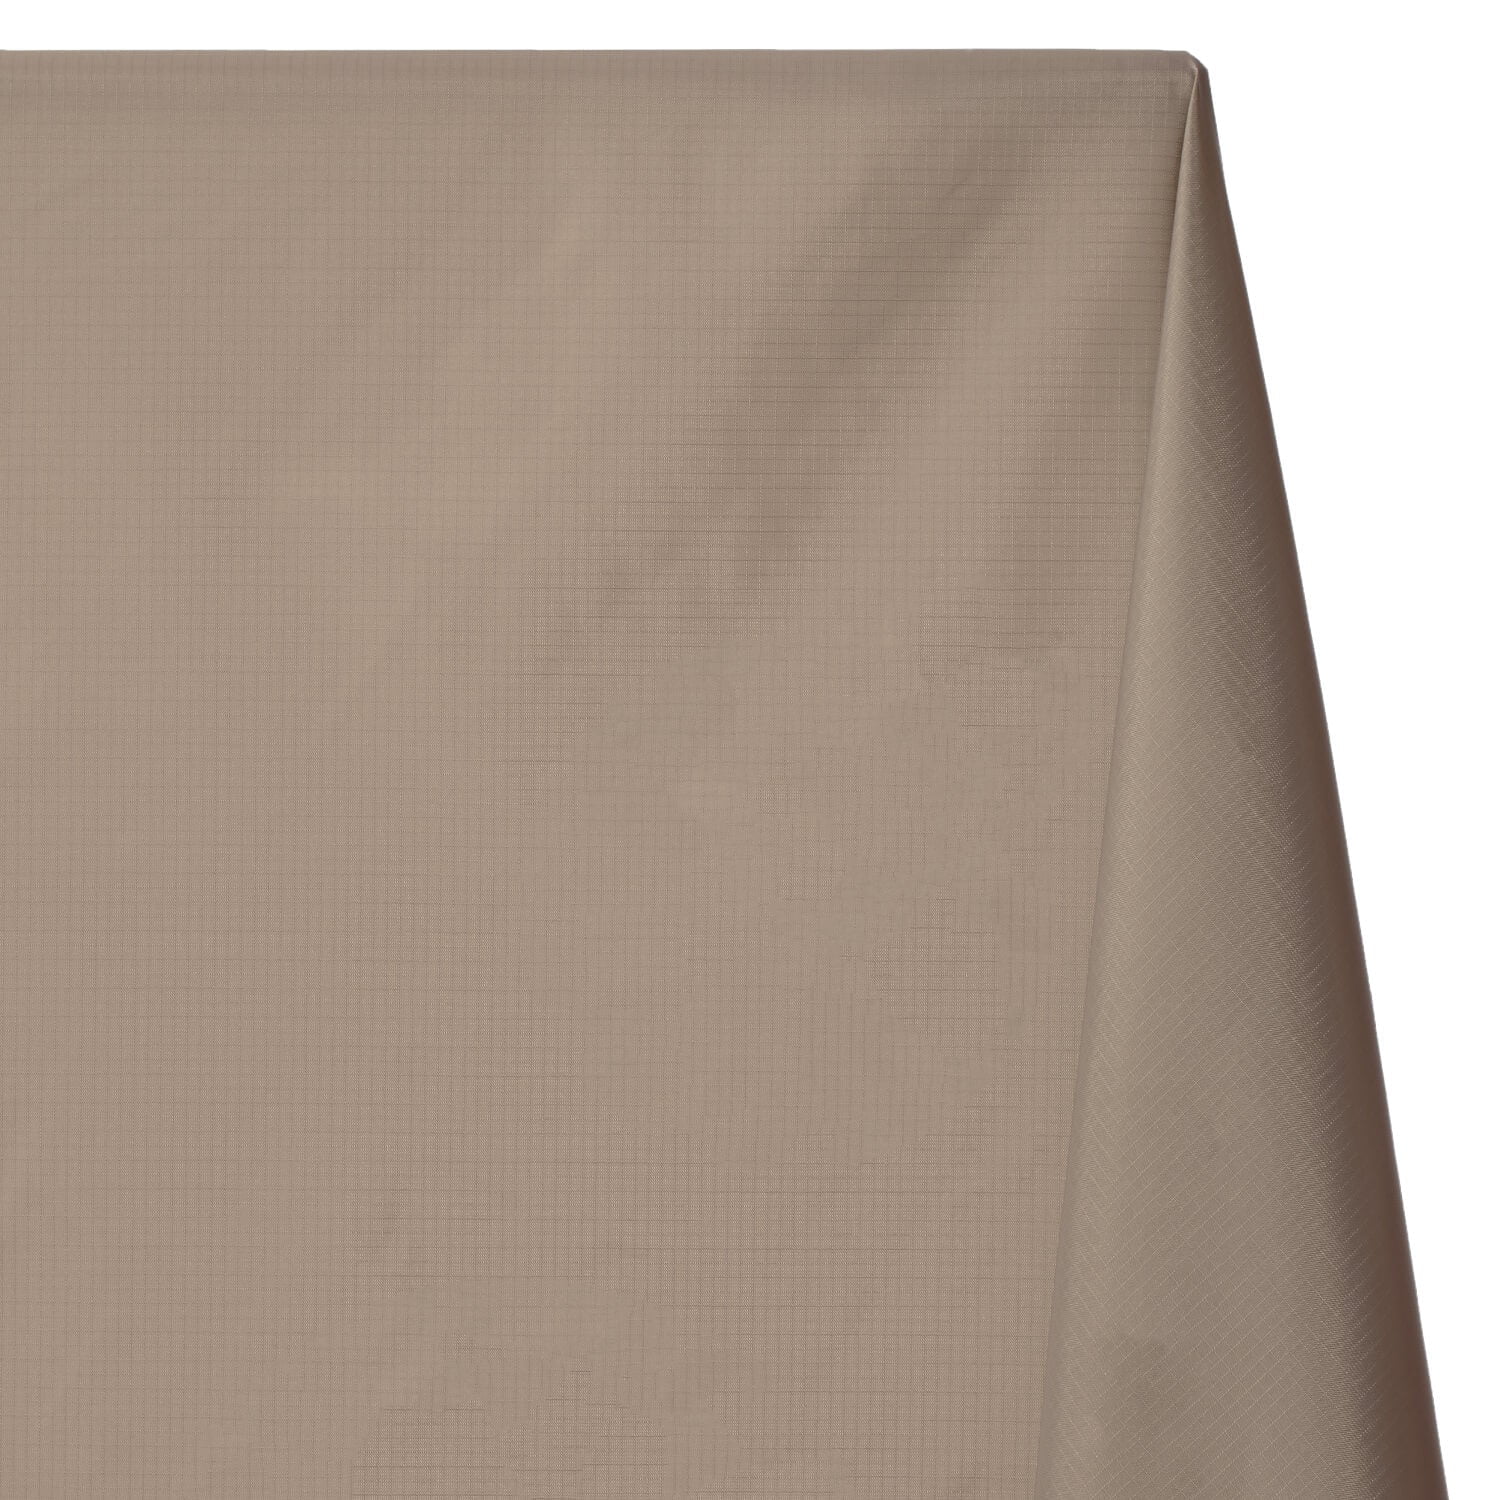 Nylon Water Resistant 70D-1.9oz Nylon Ripstop DWR Fabric 60 Wide Fabric By  The Yard - Off-White 